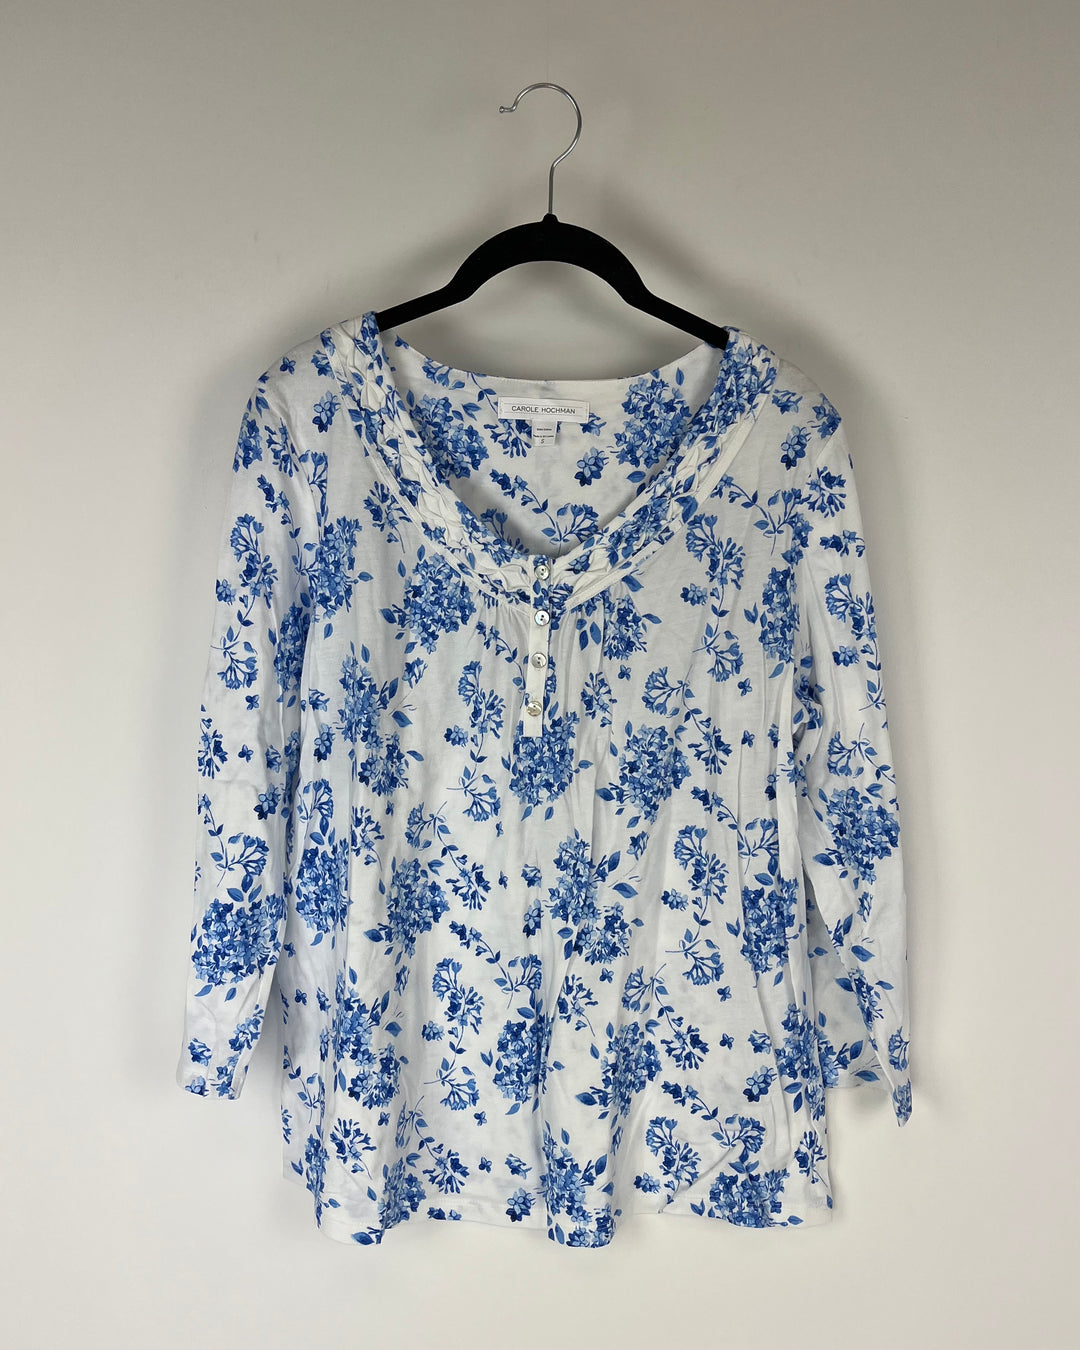 Blue and White Floral Print Quarter Length Sleeve Top - Small